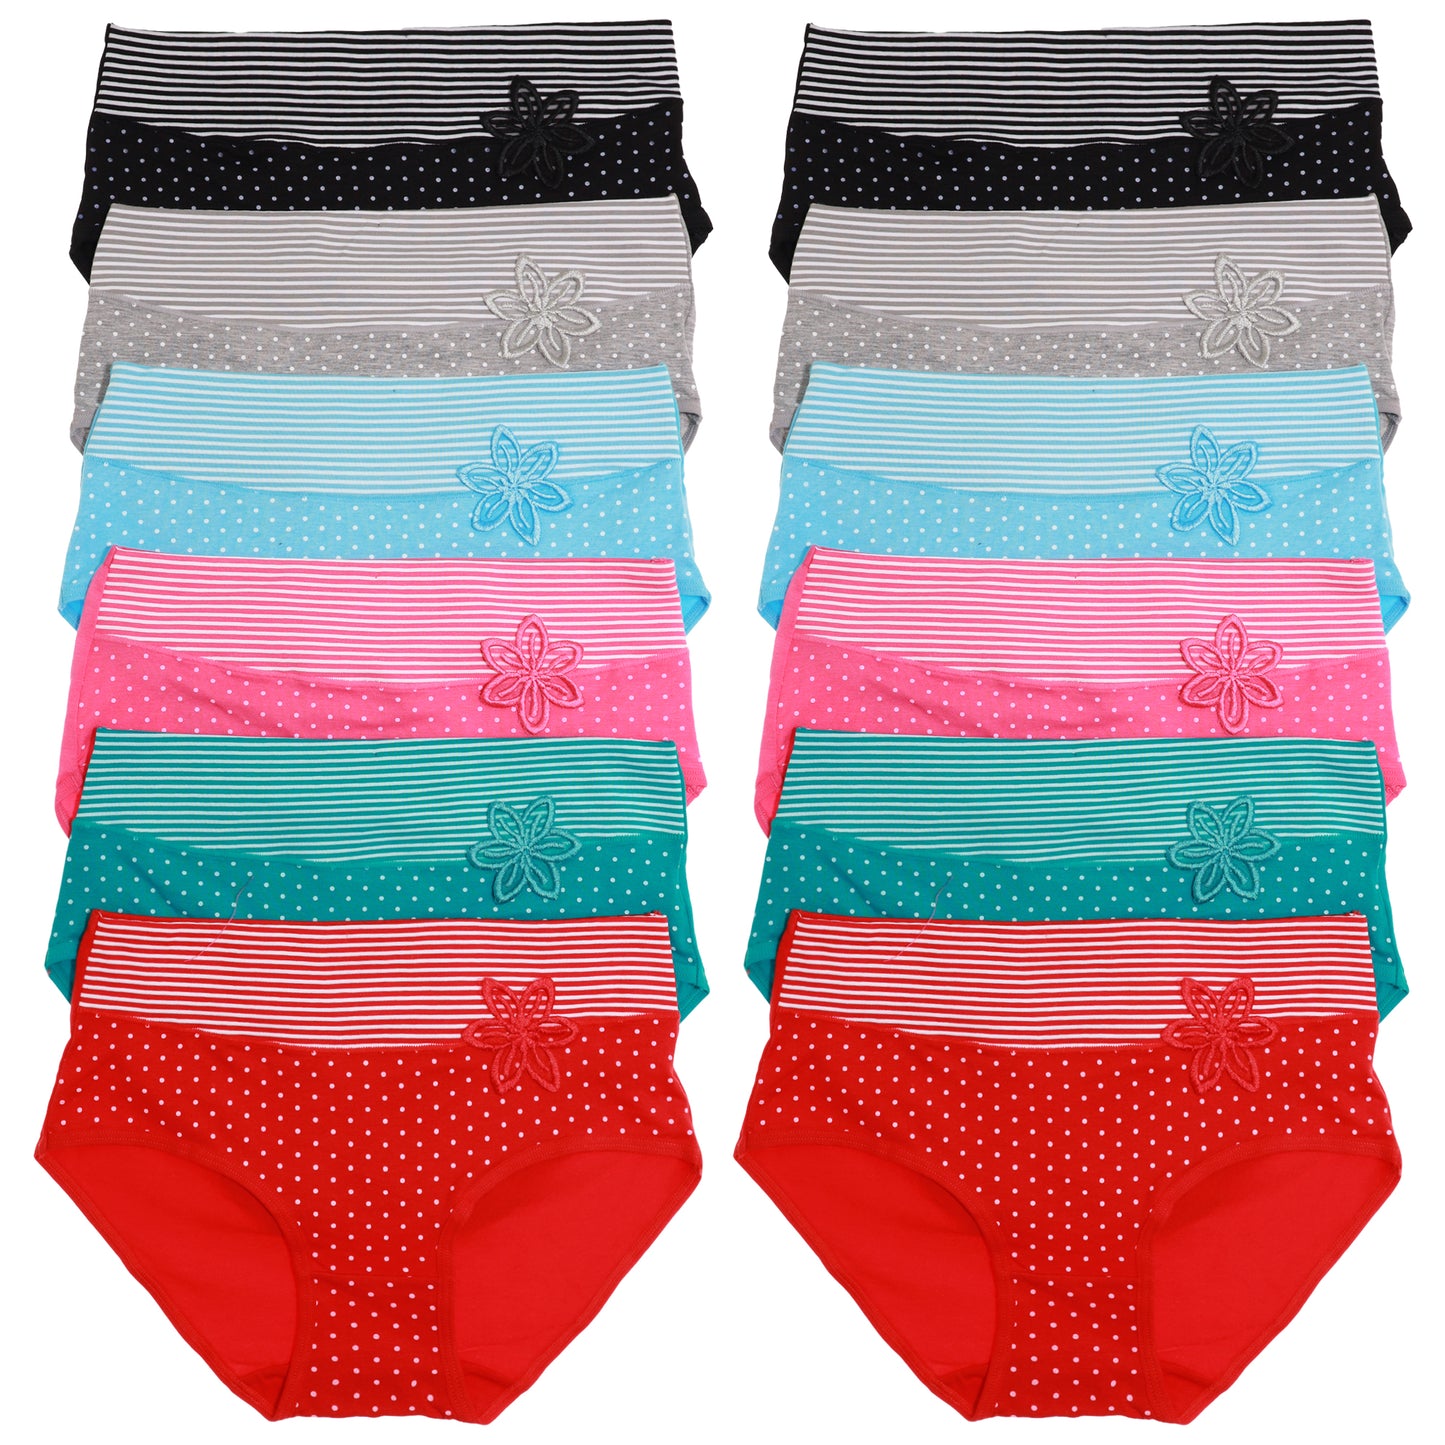 Angelina Cotton Hiphuggers with Polka-Dot Print and Striped Waist (6 or 12 Pack), #G1349